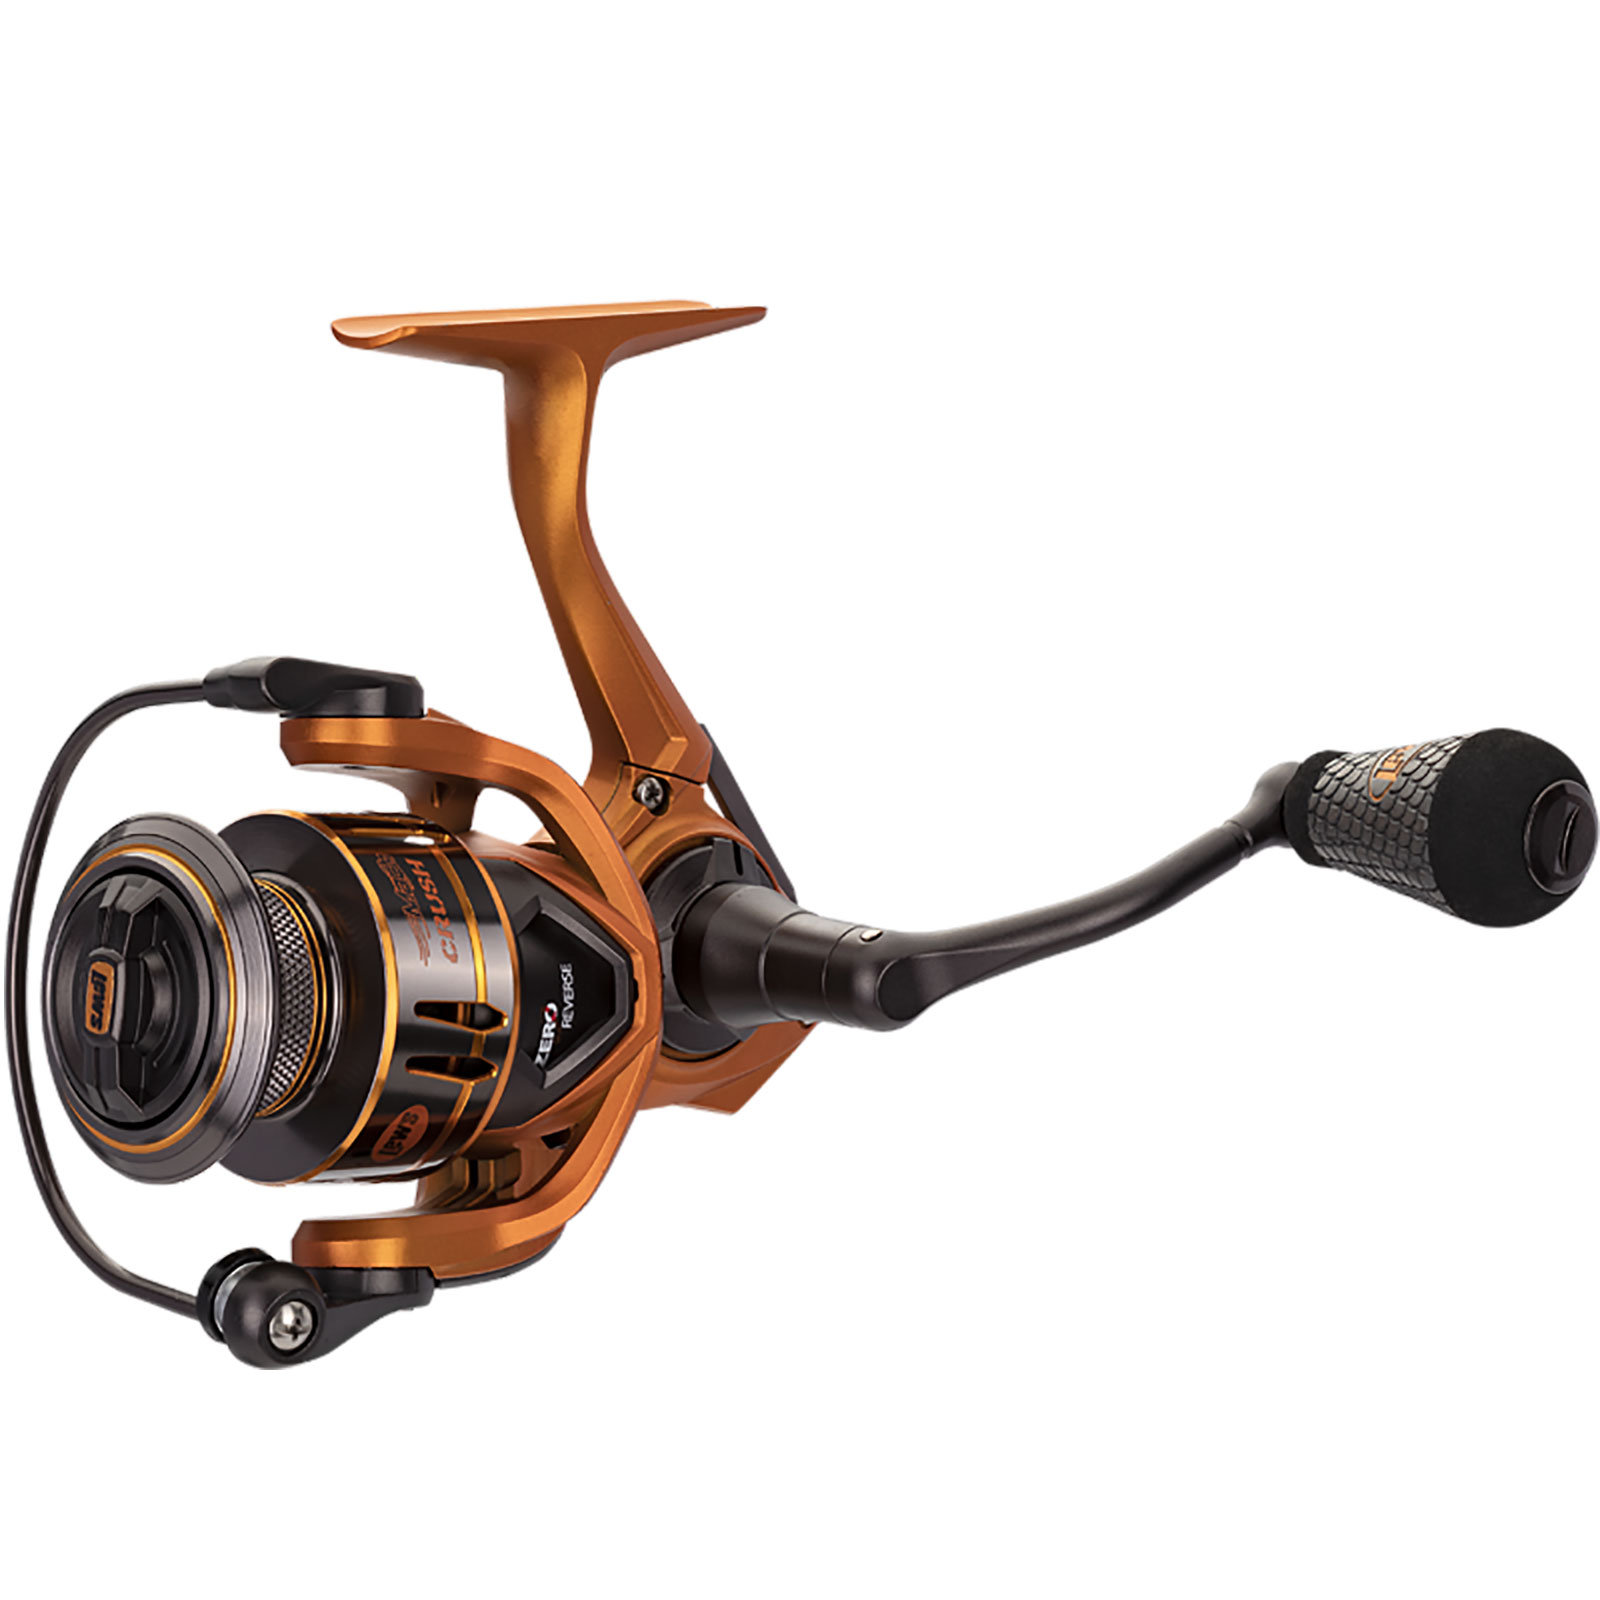 Lew's - Casting reel - Tackle 